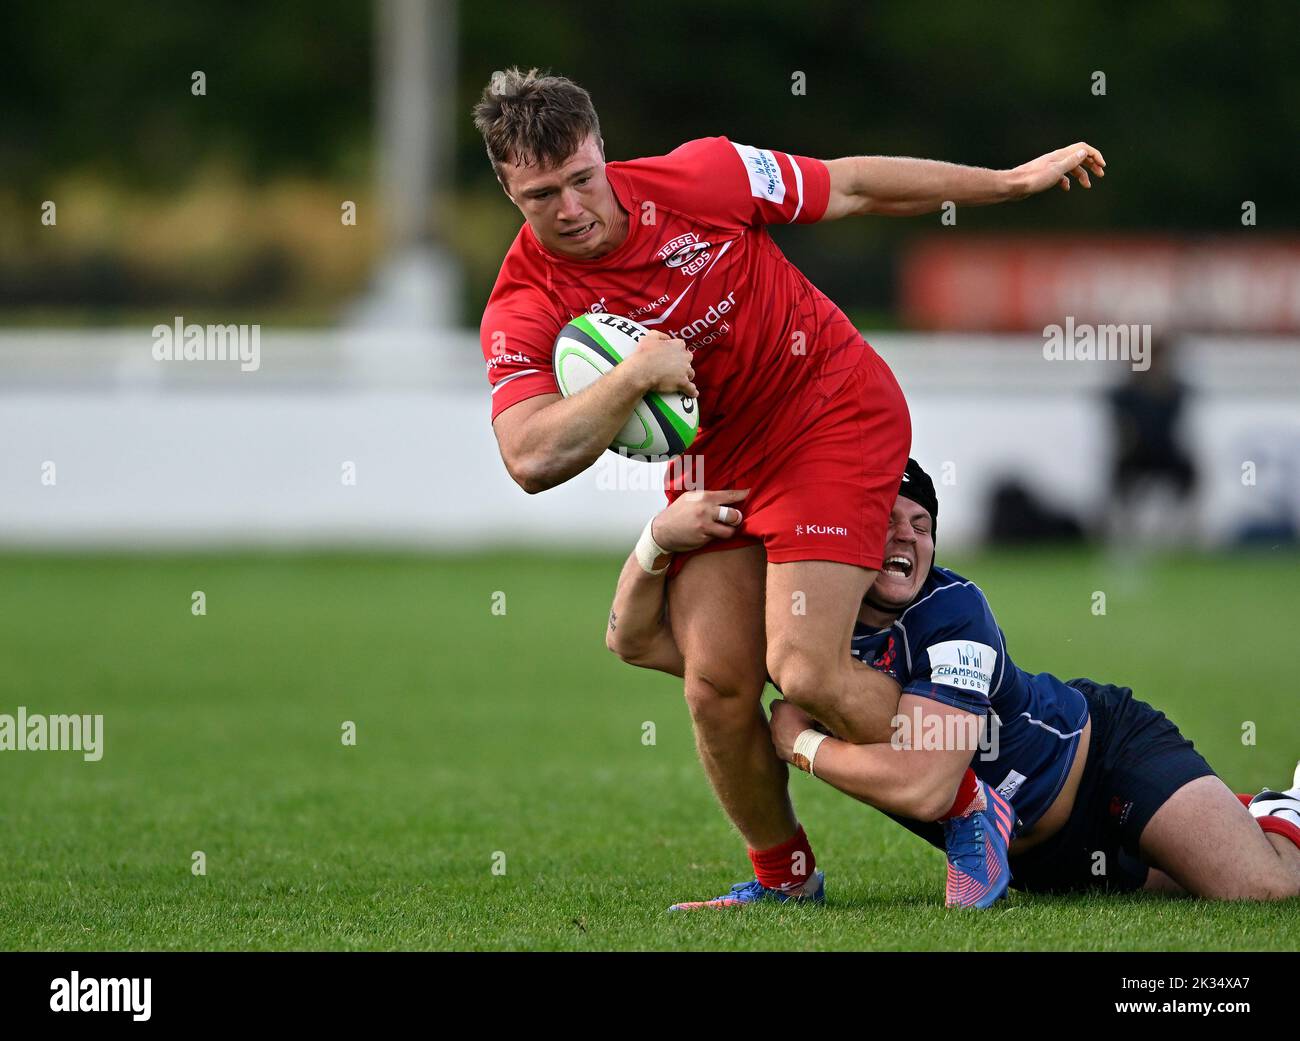 Richmond, United Kingdom. 24th Sep, 2022. Championship Rugby. London Scottish V Jersey Reds. The Richmond Athletic Ground. Richmond. Charlie Powell (Jersey Reds) is tackled by Harry Sheppard (London Scottish) during the London Scottish V Jersey Reds championship rugby match. Credit: Sport In Pictures/Alamy Live News Stock Photo